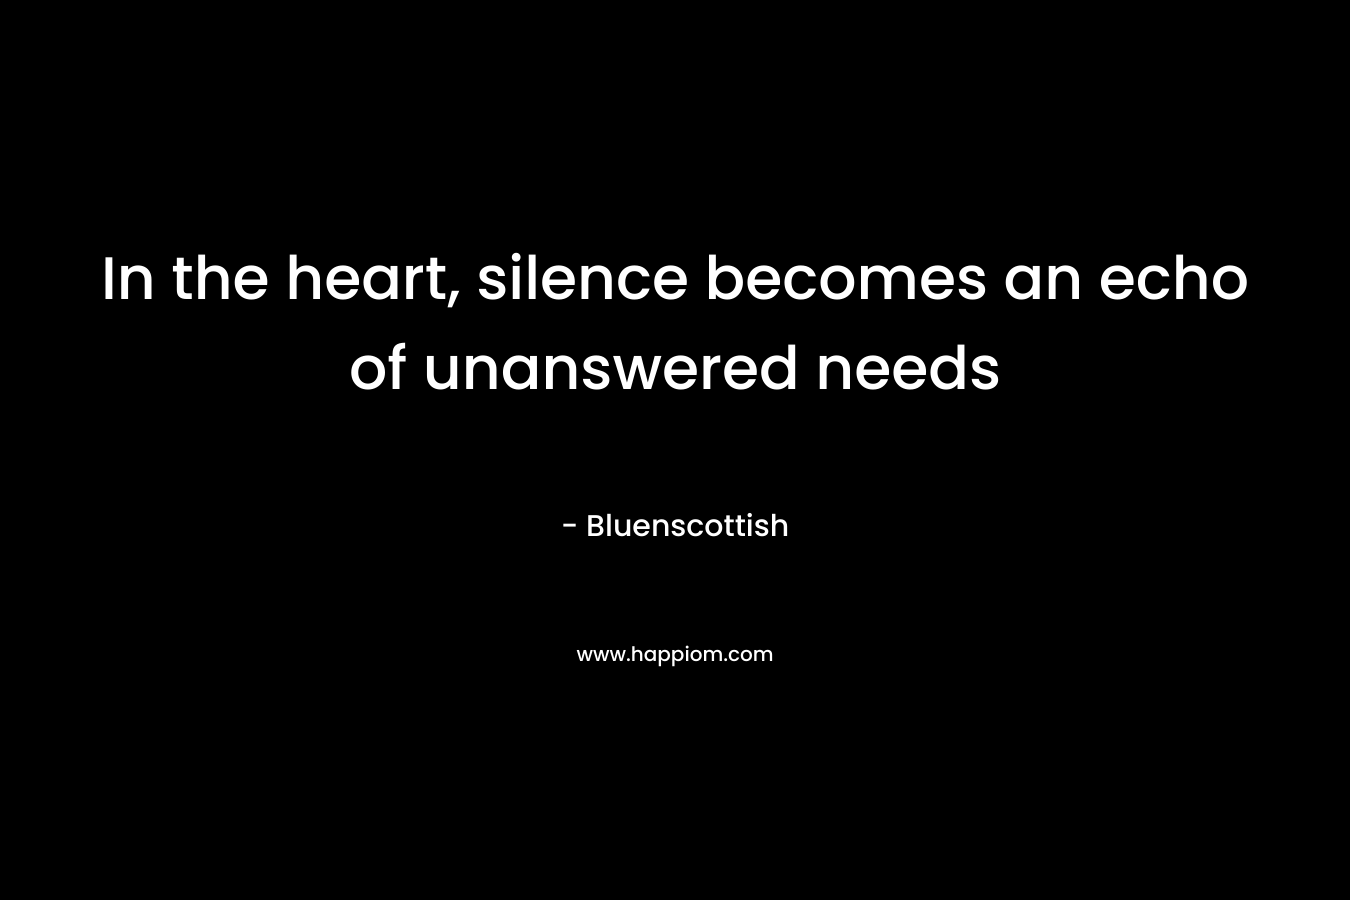 In the heart, silence becomes an echo of unanswered needs – Bluenscottish